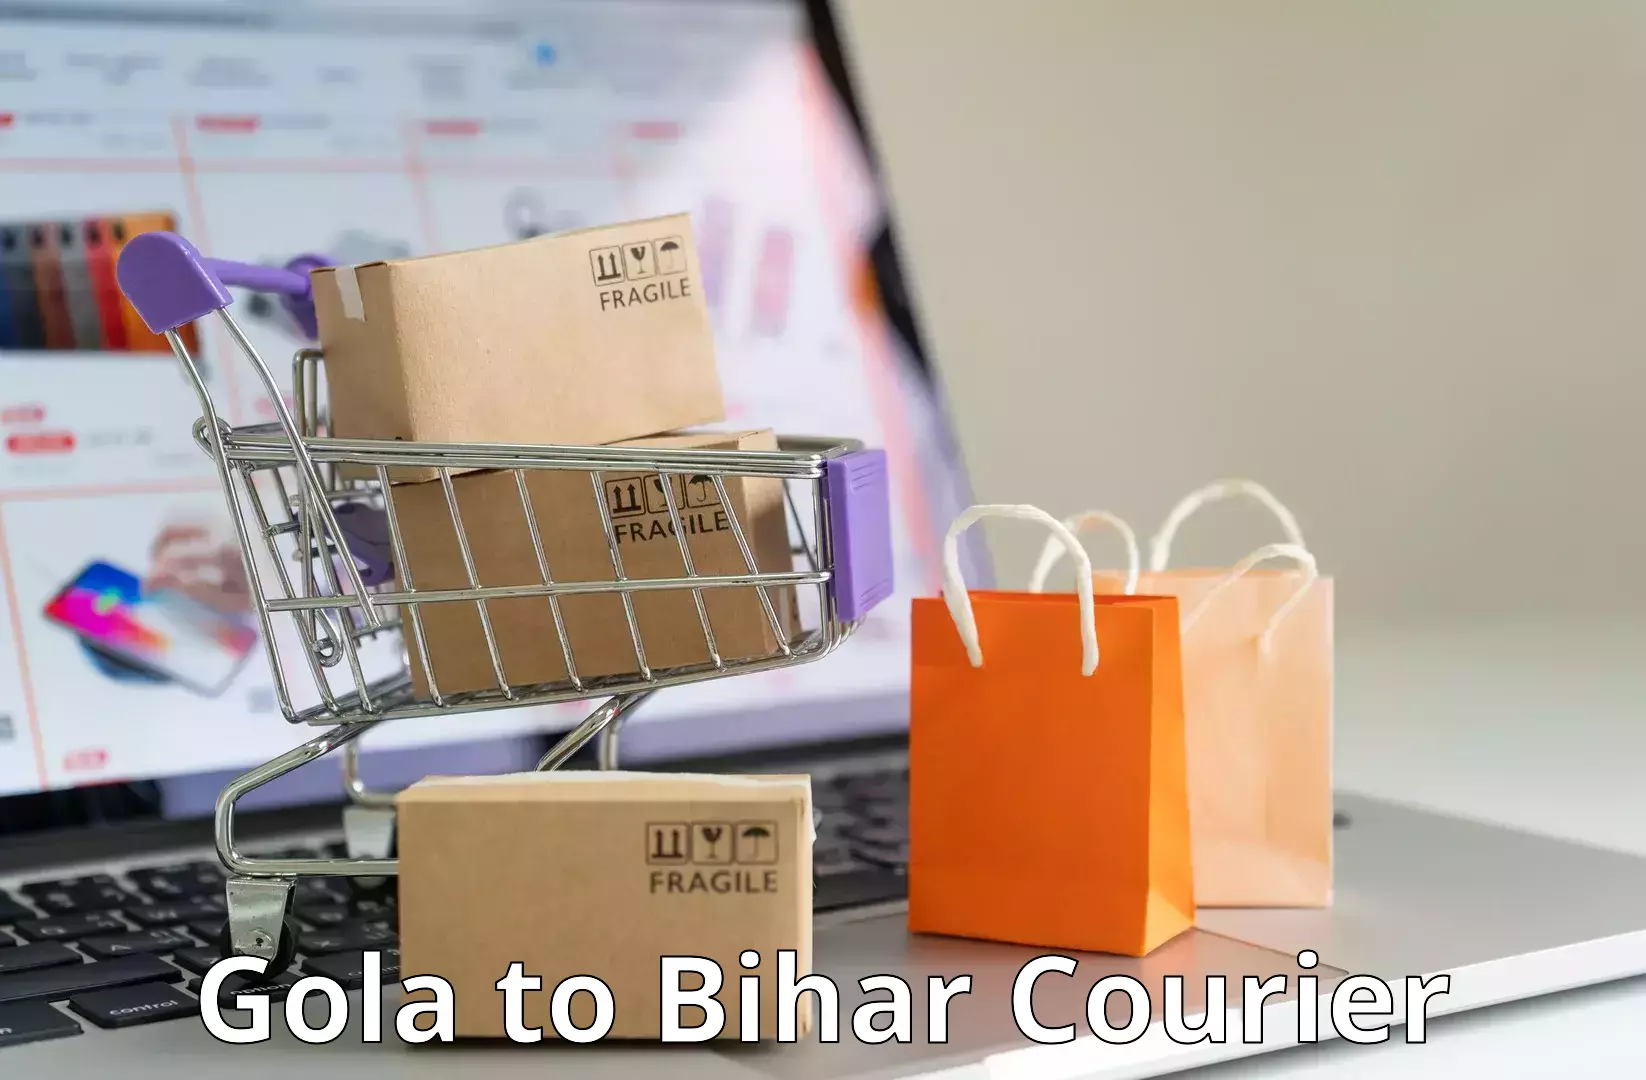 State-of-the-art courier technology in Gola to Dinara